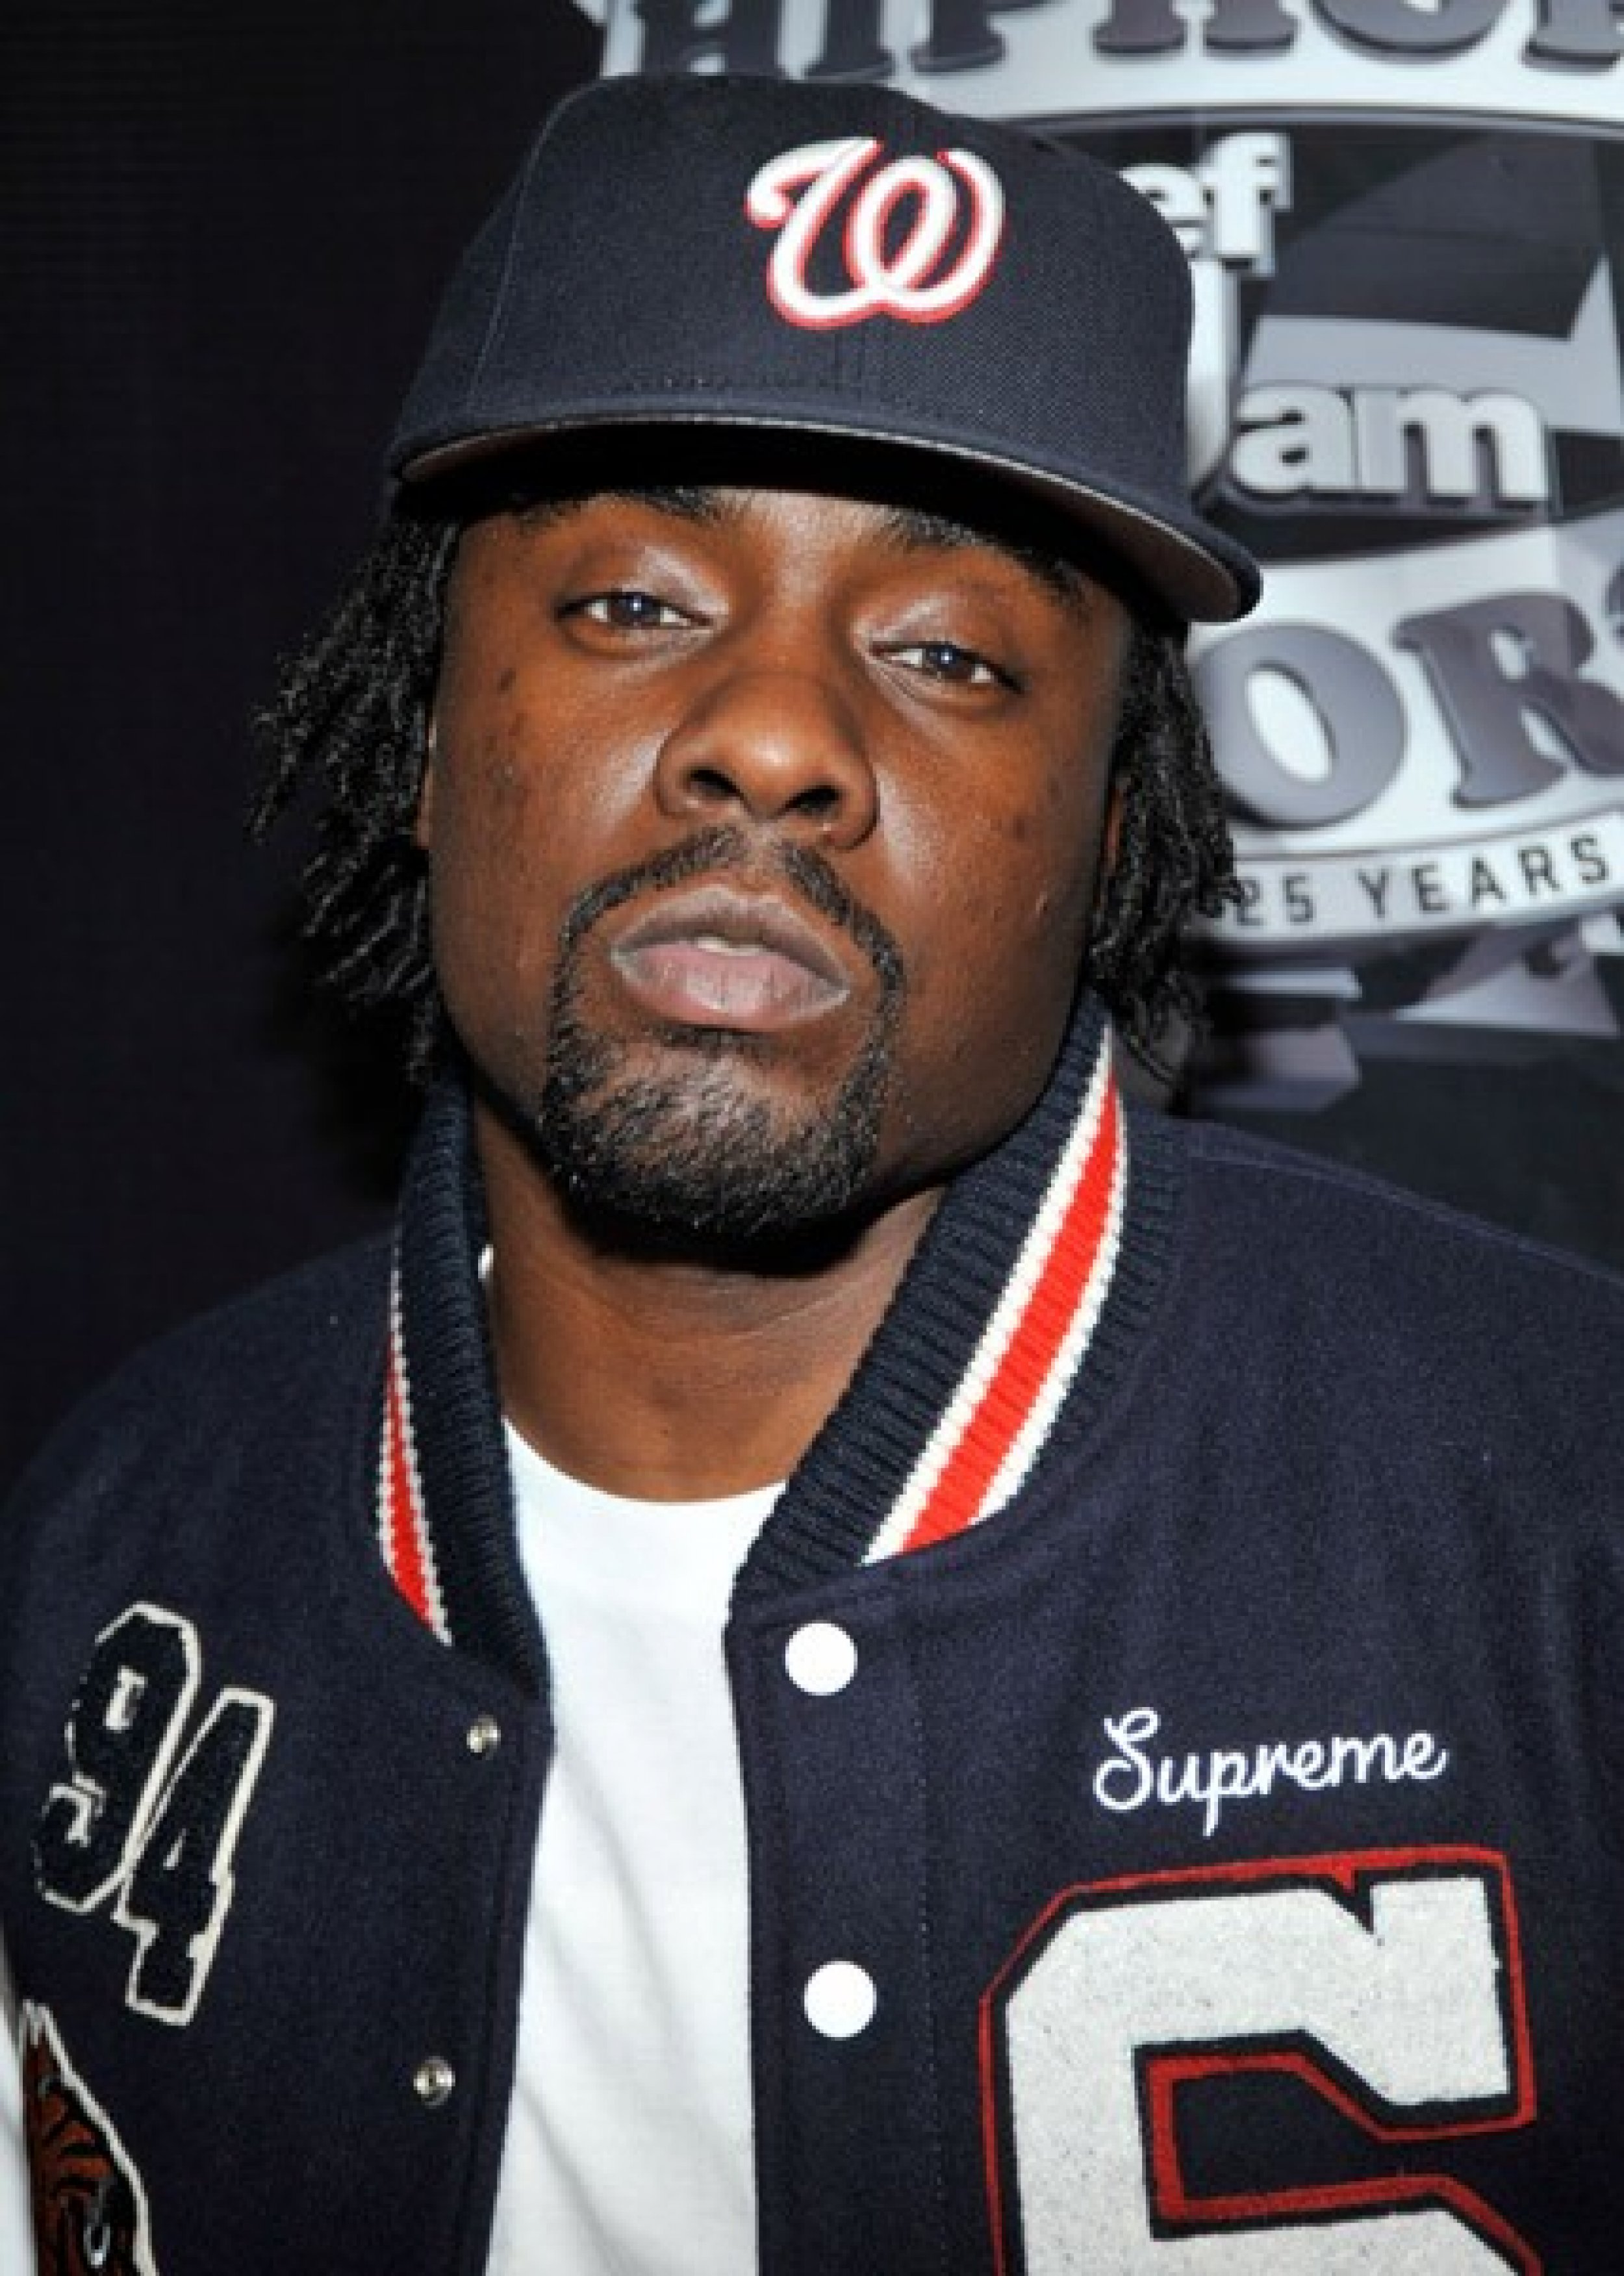 Wale Releases New Mixtape Listen to it Here